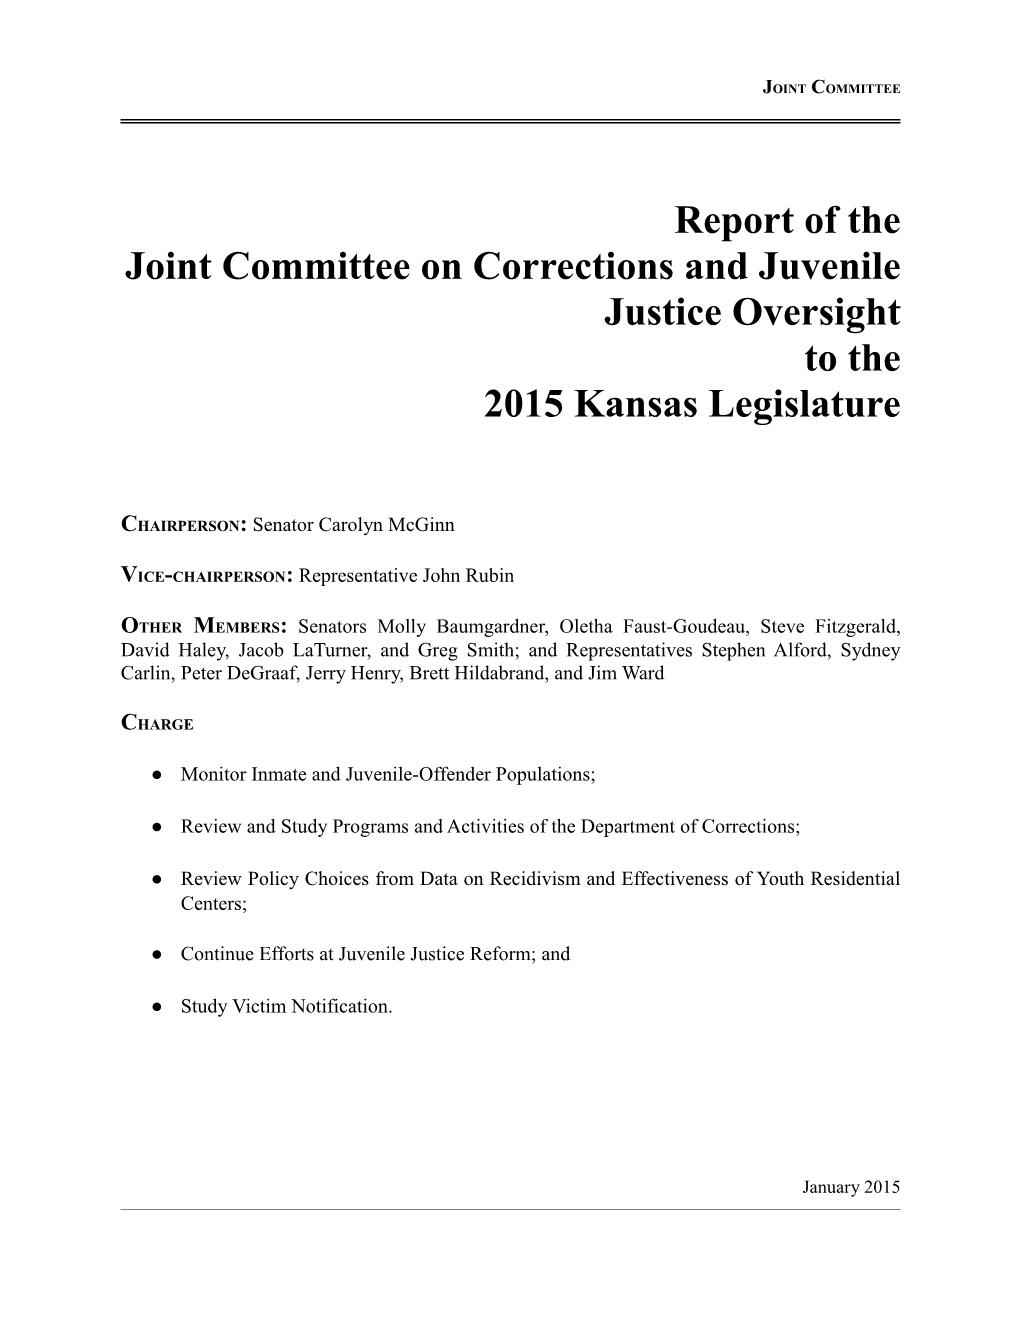 Report of the Joint Committee on Corrections and Juvenile Justice Oversight to the 2015 Kansas Legislature